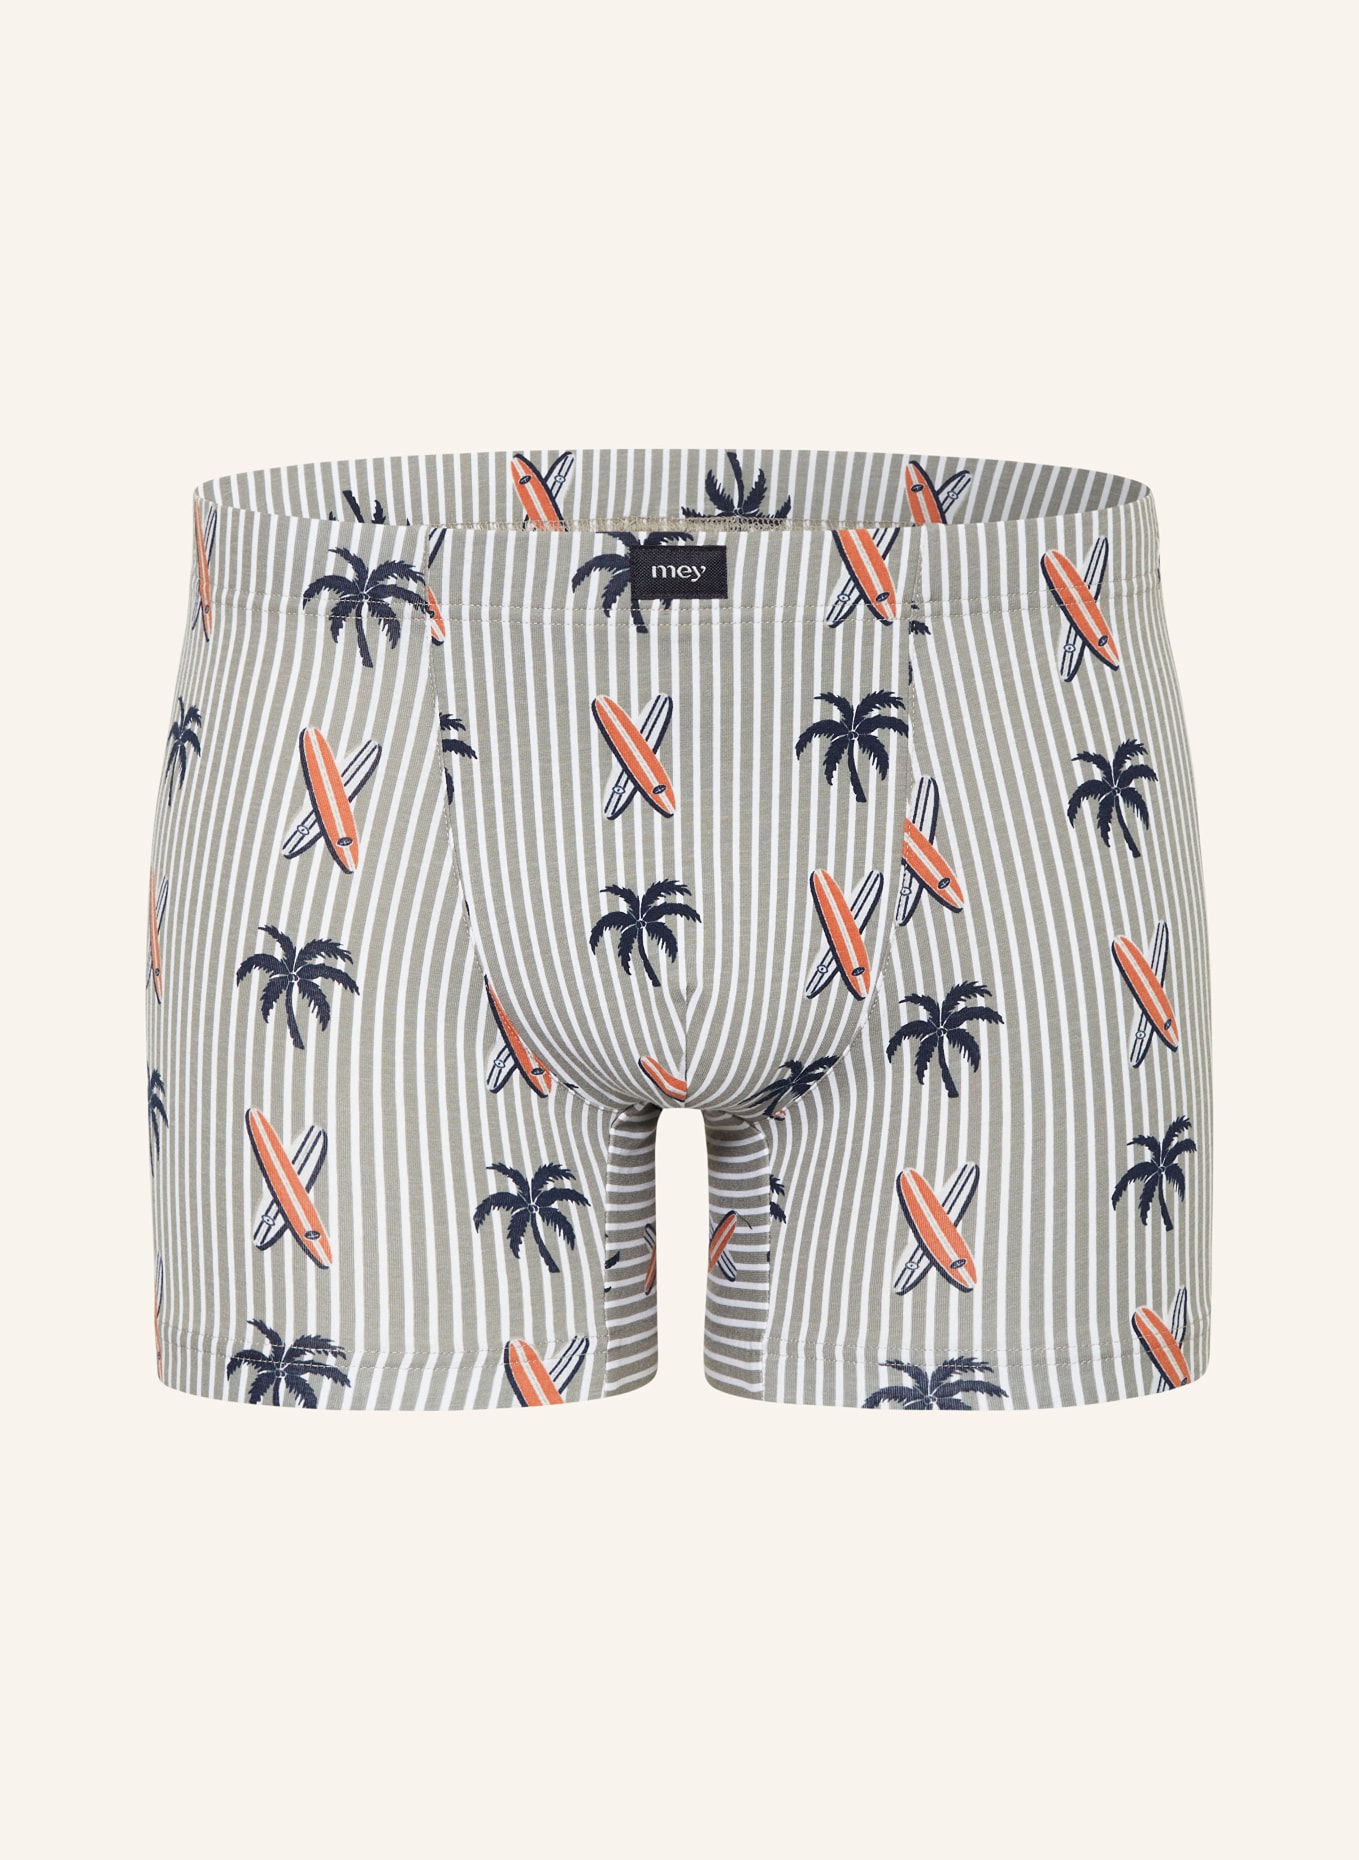 mey Boxer shorts series PALM TREE, Color: GREEN/ WHITE/ DARK BLUE (Image 1)